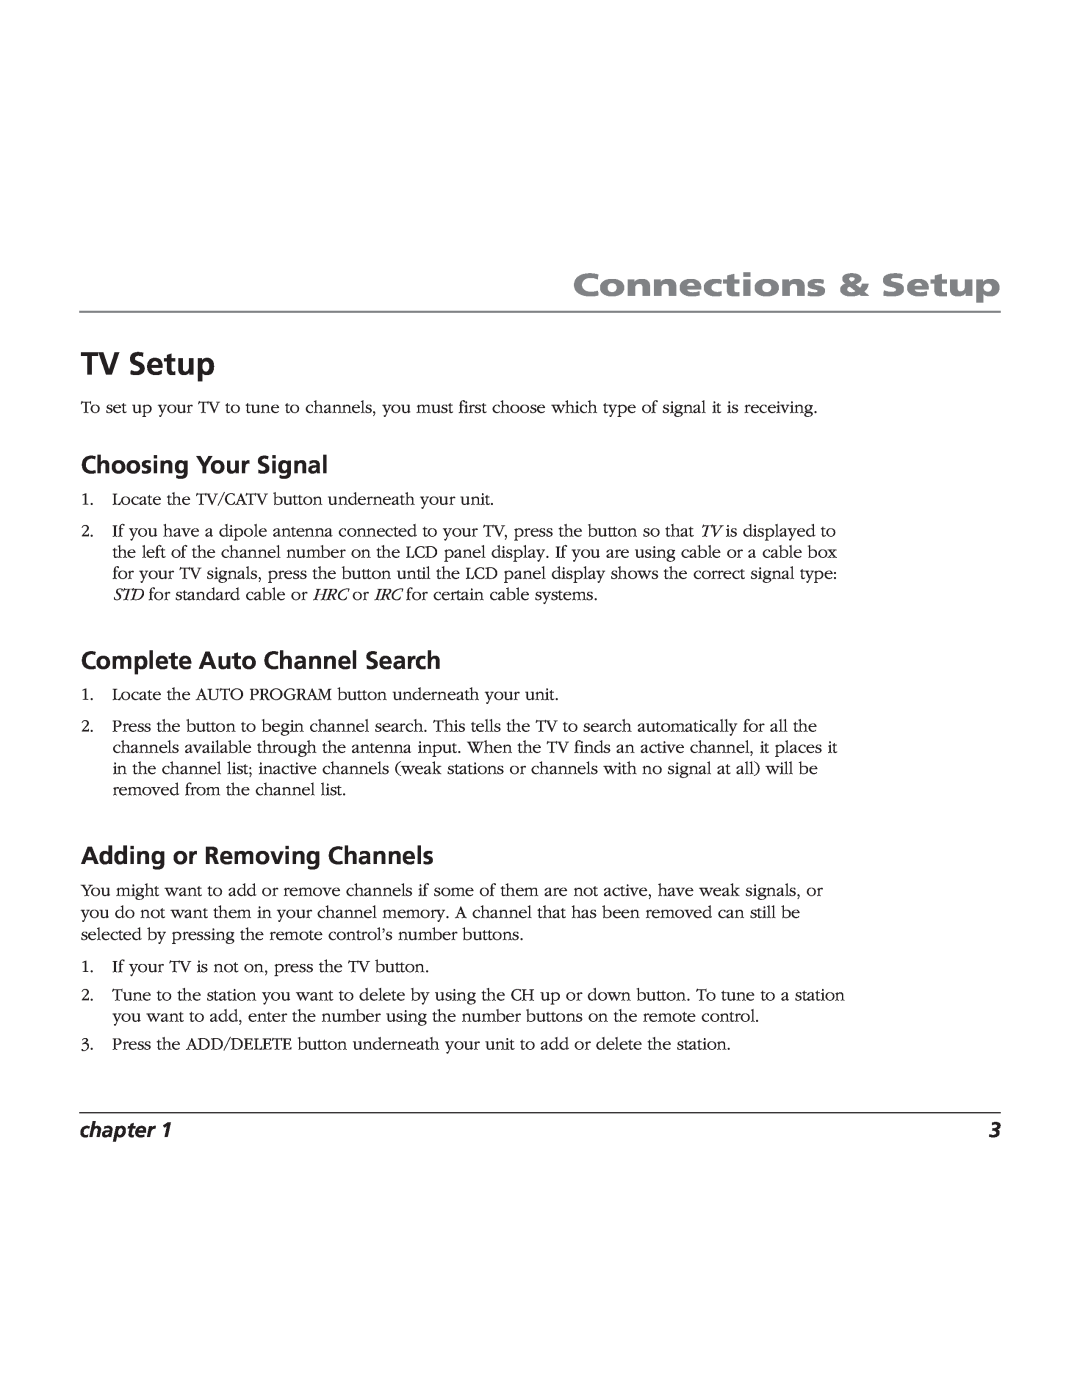 RCA BLC524 TV Setup, Choosing Your Signal, Complete Auto Channel Search, Adding or Removing Channels, Connections & Setup 